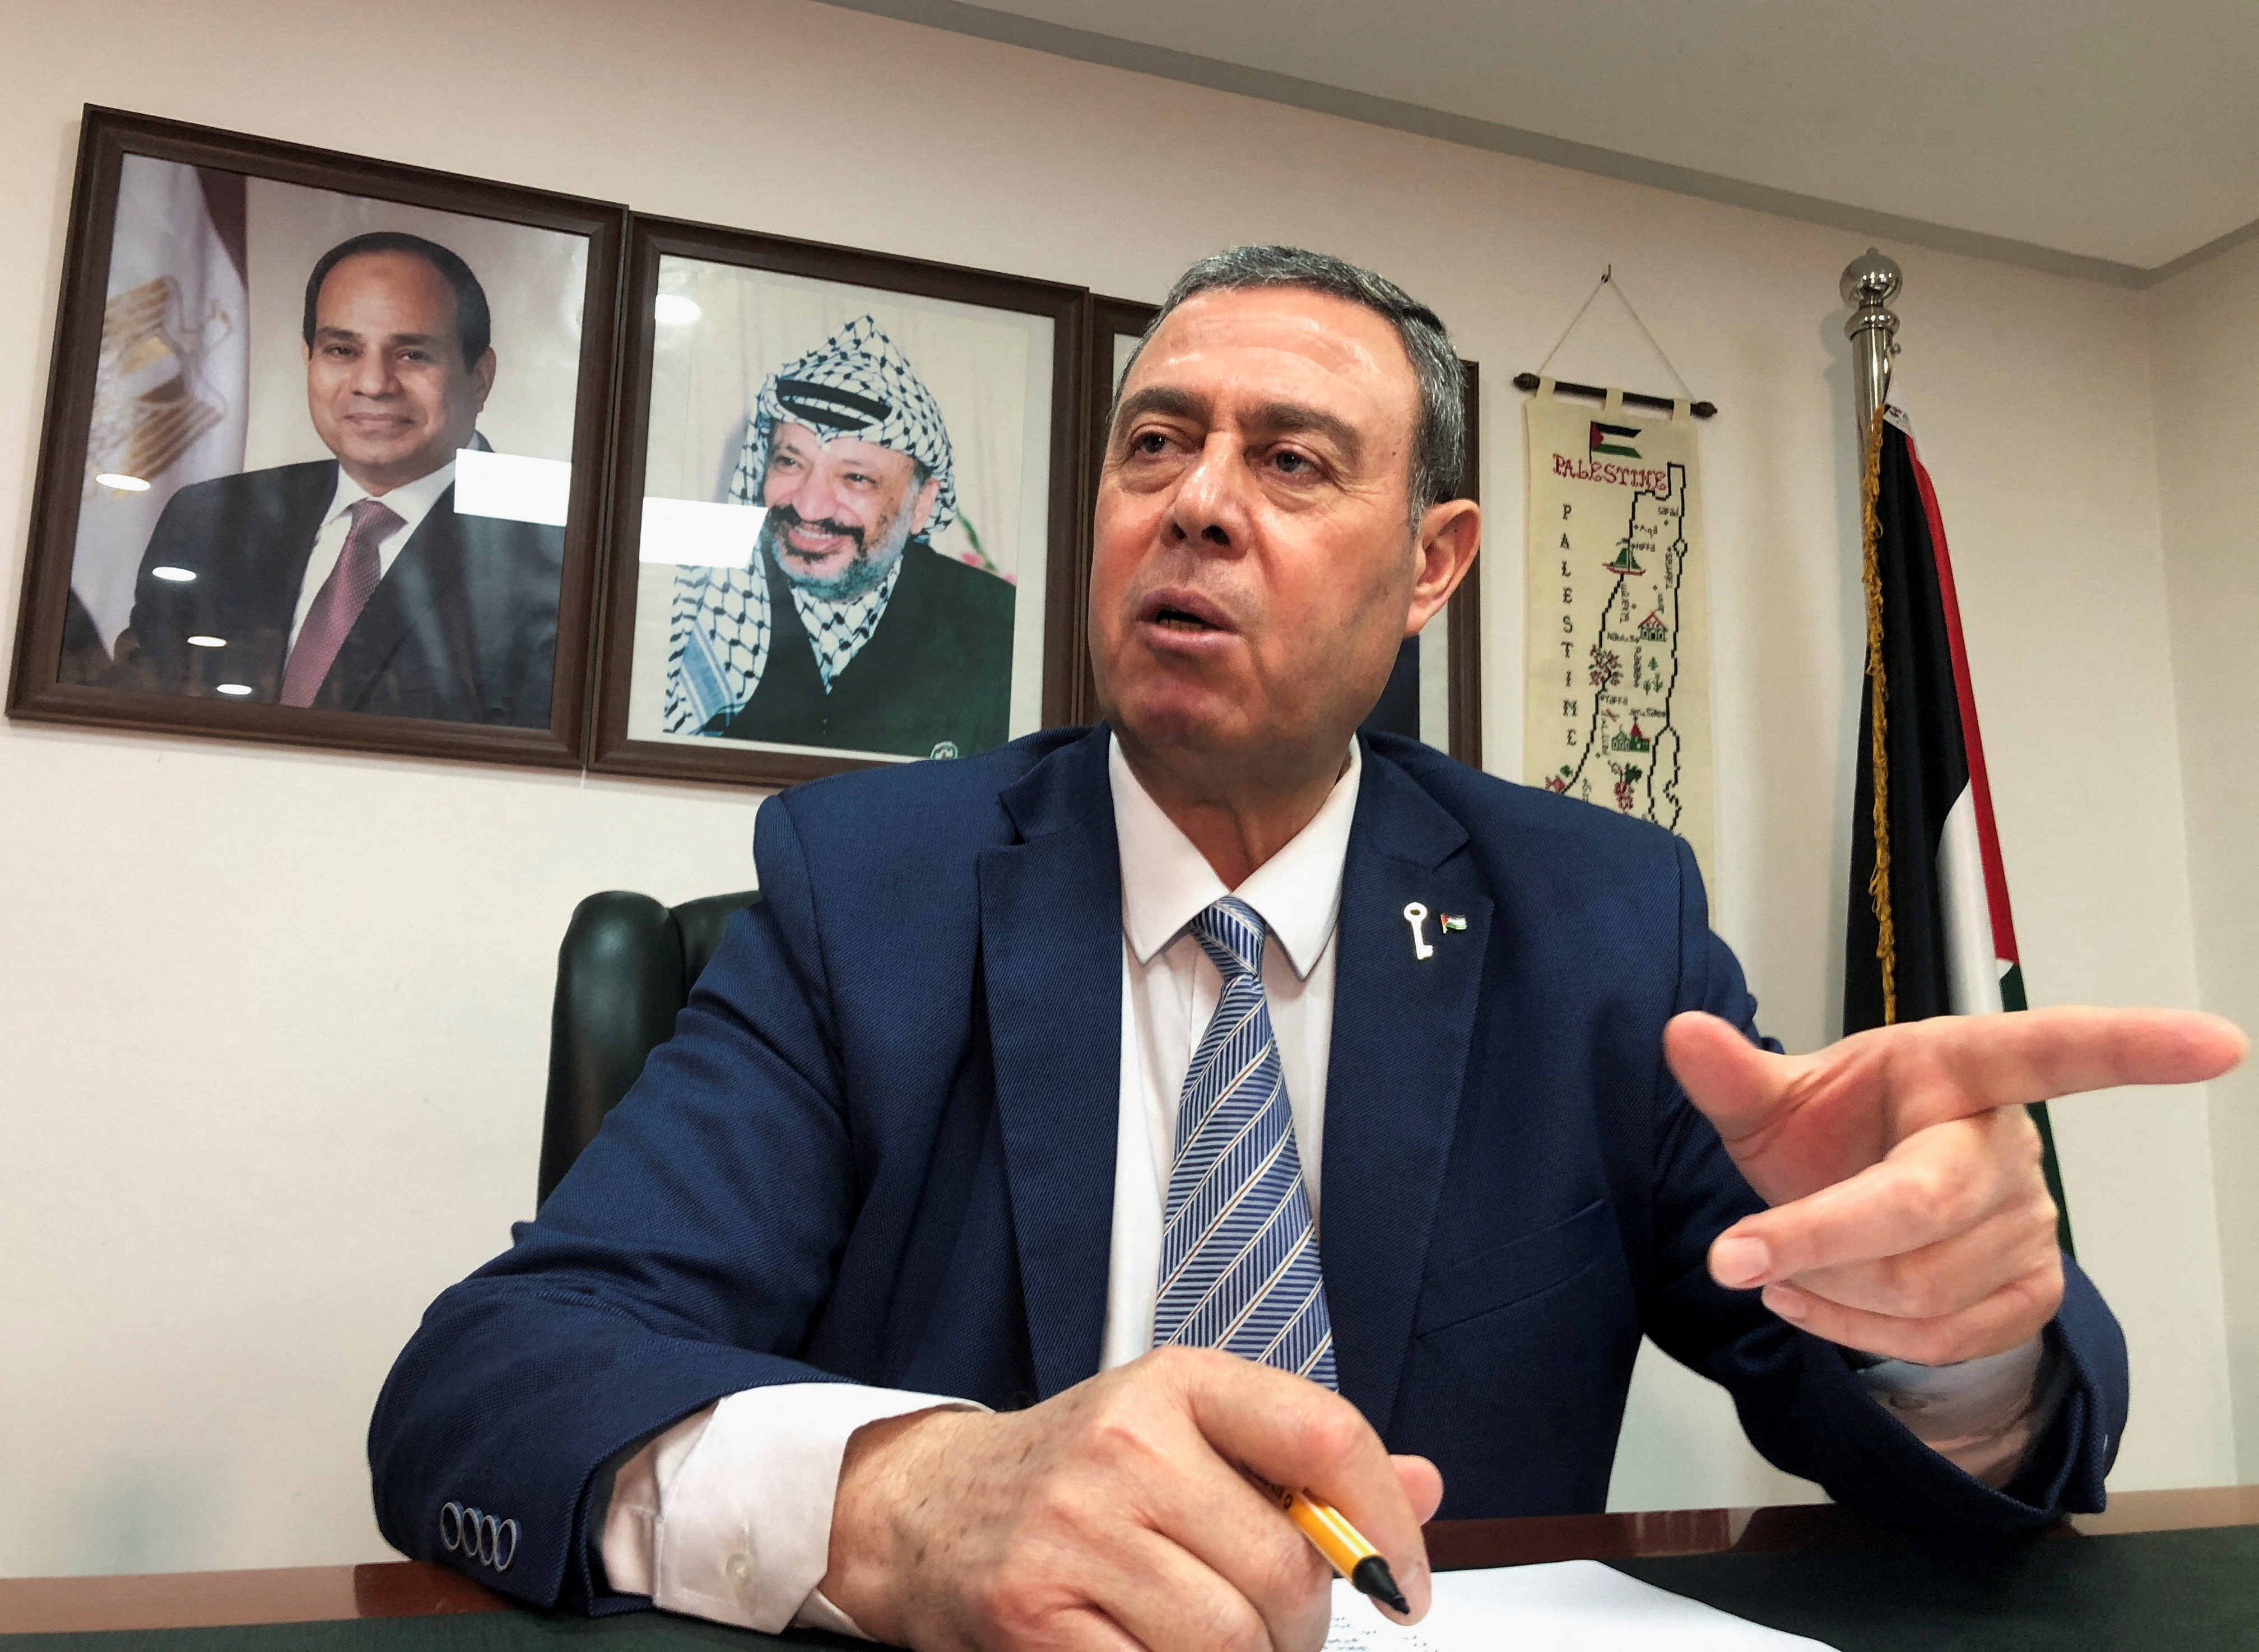 Palestinian Ambassador to Egypt Diab al-Louh speaks during an interview with Reuters at the Palestine embassy in Cairo